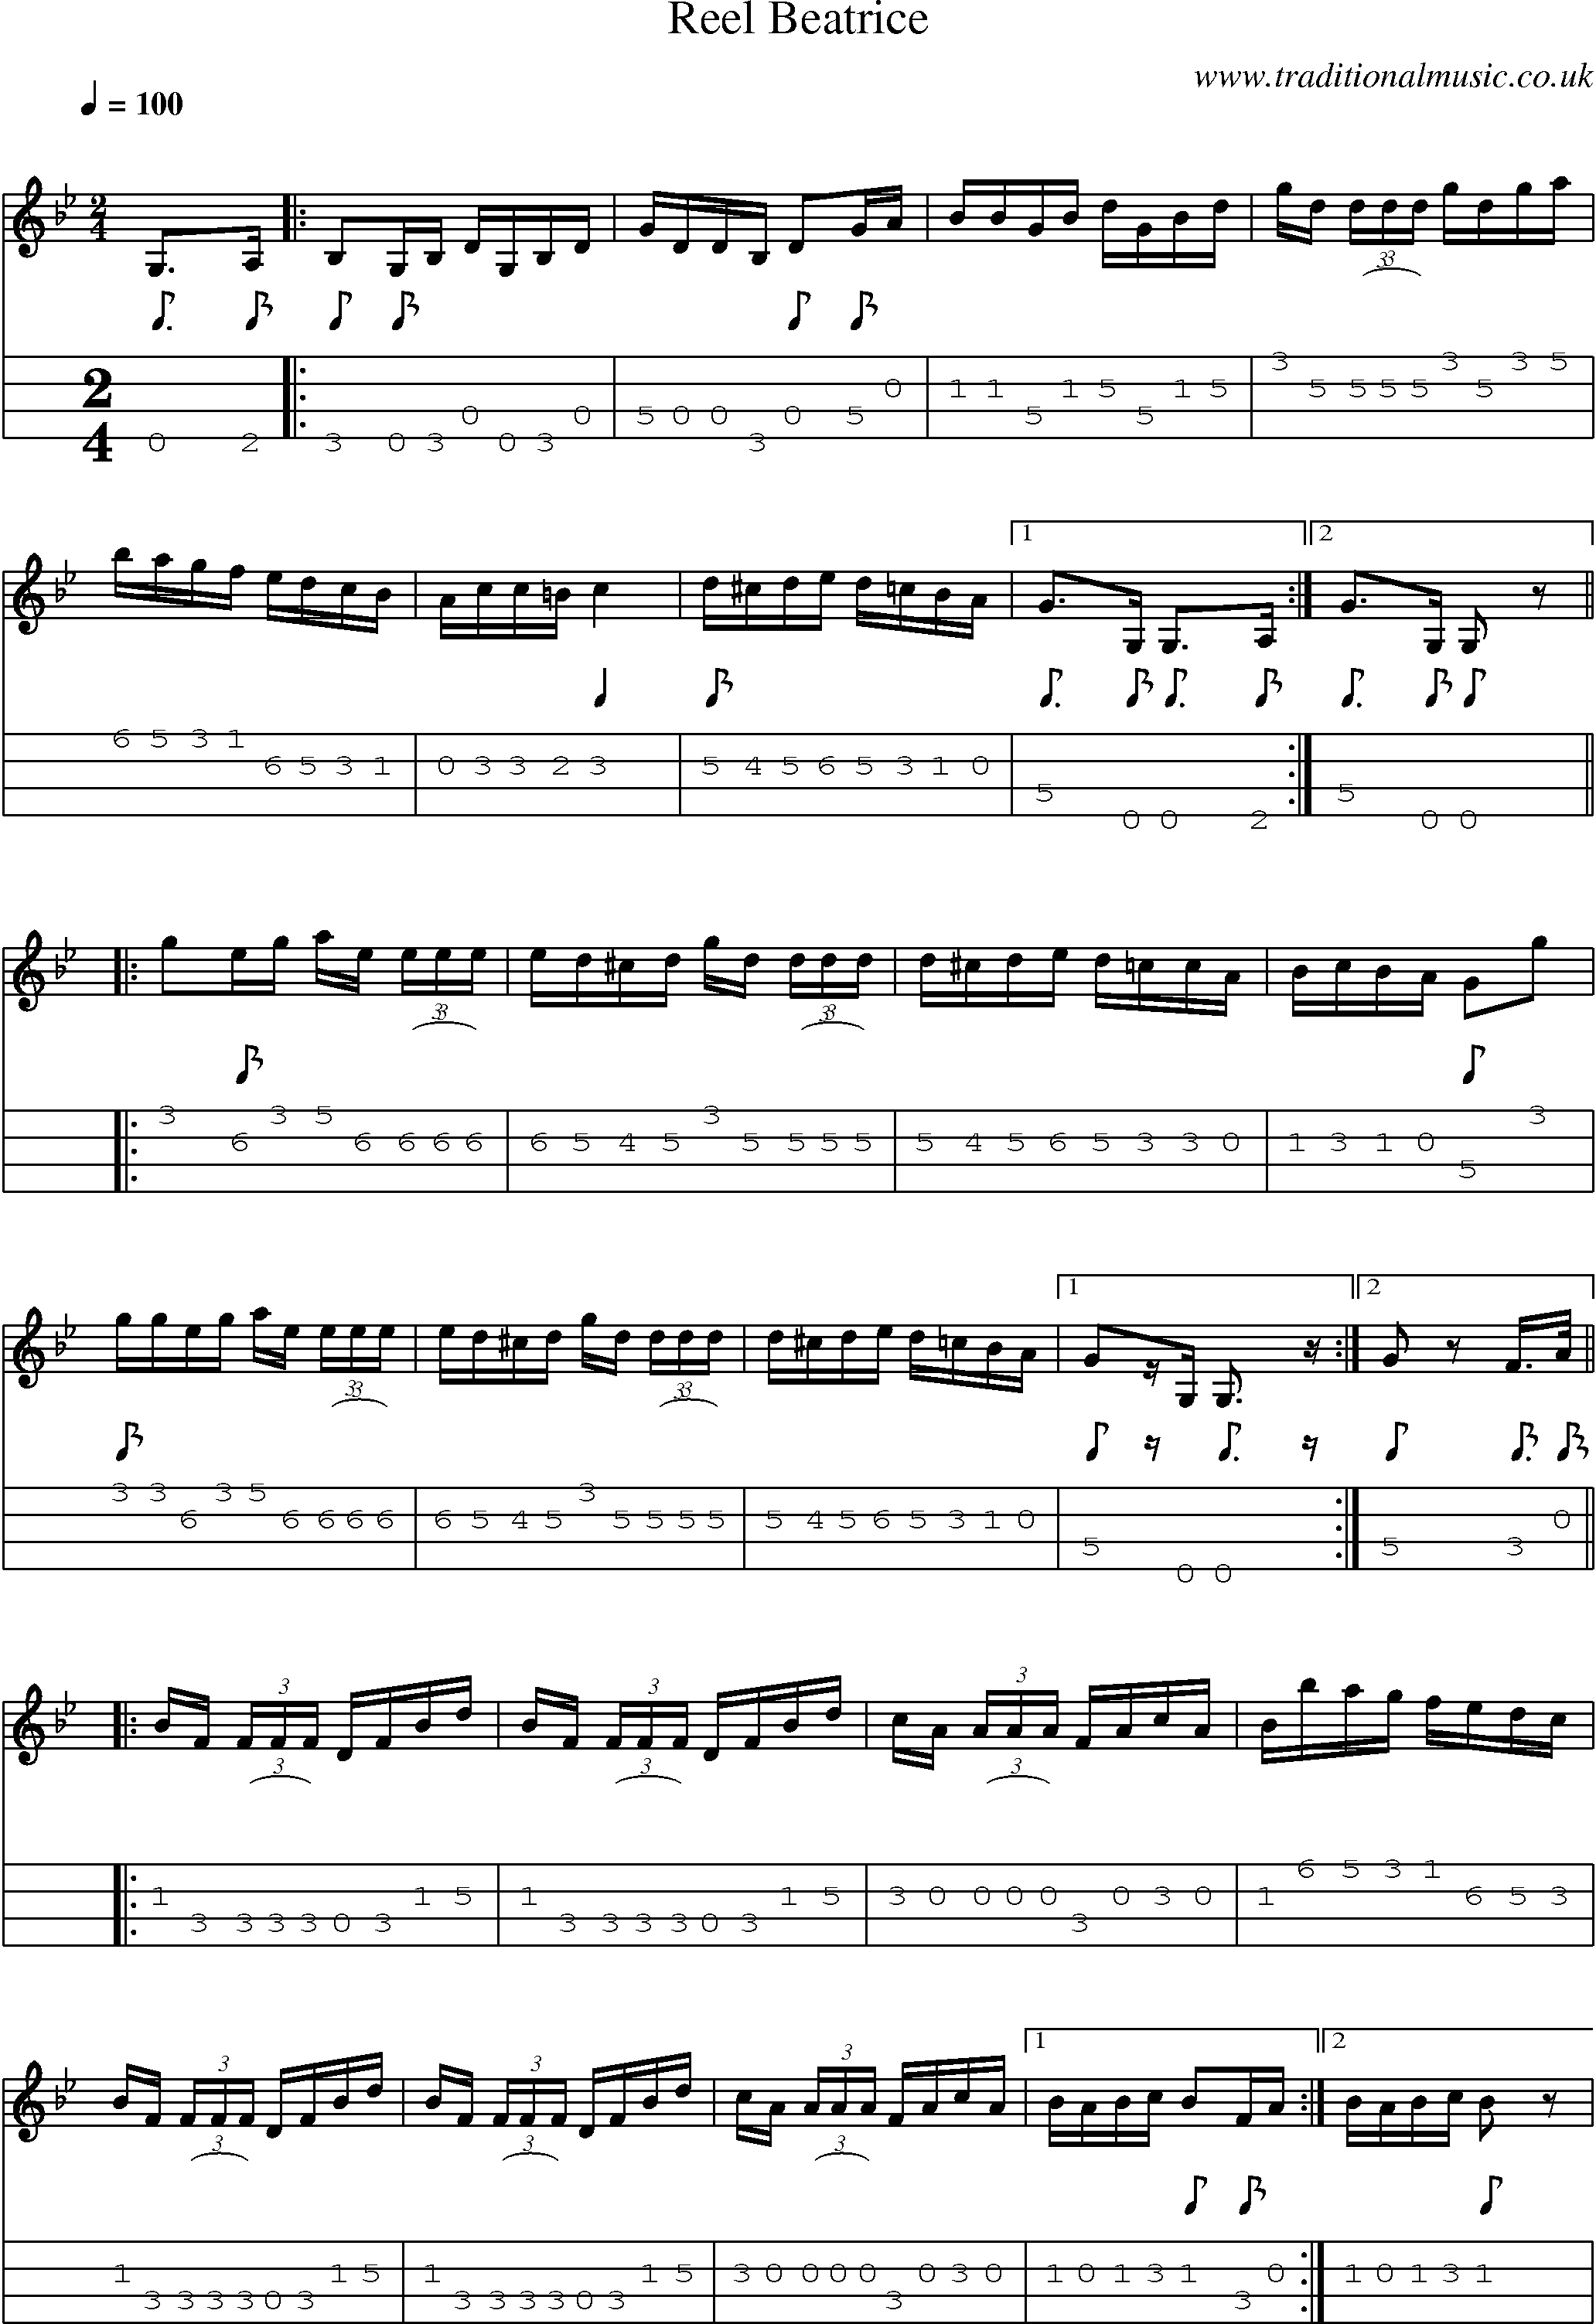 Music Score and Mandolin Tabs for Reel Beatrice